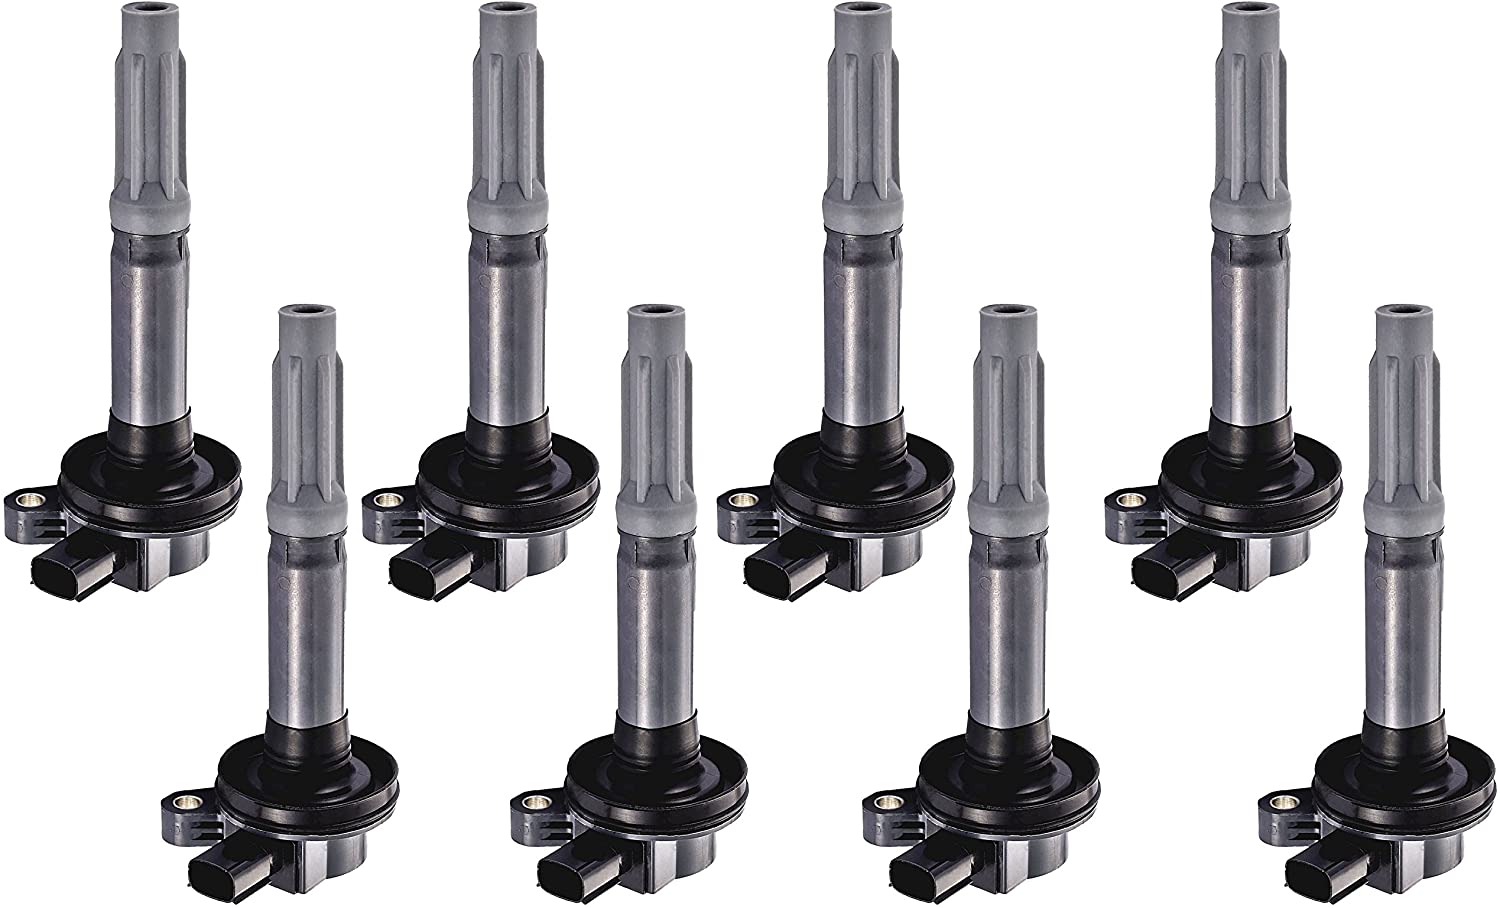 ENA Pack of 8 Ignition Coils Compatible with 2011-2016 Ford F-150 Mustang V8 5.0L